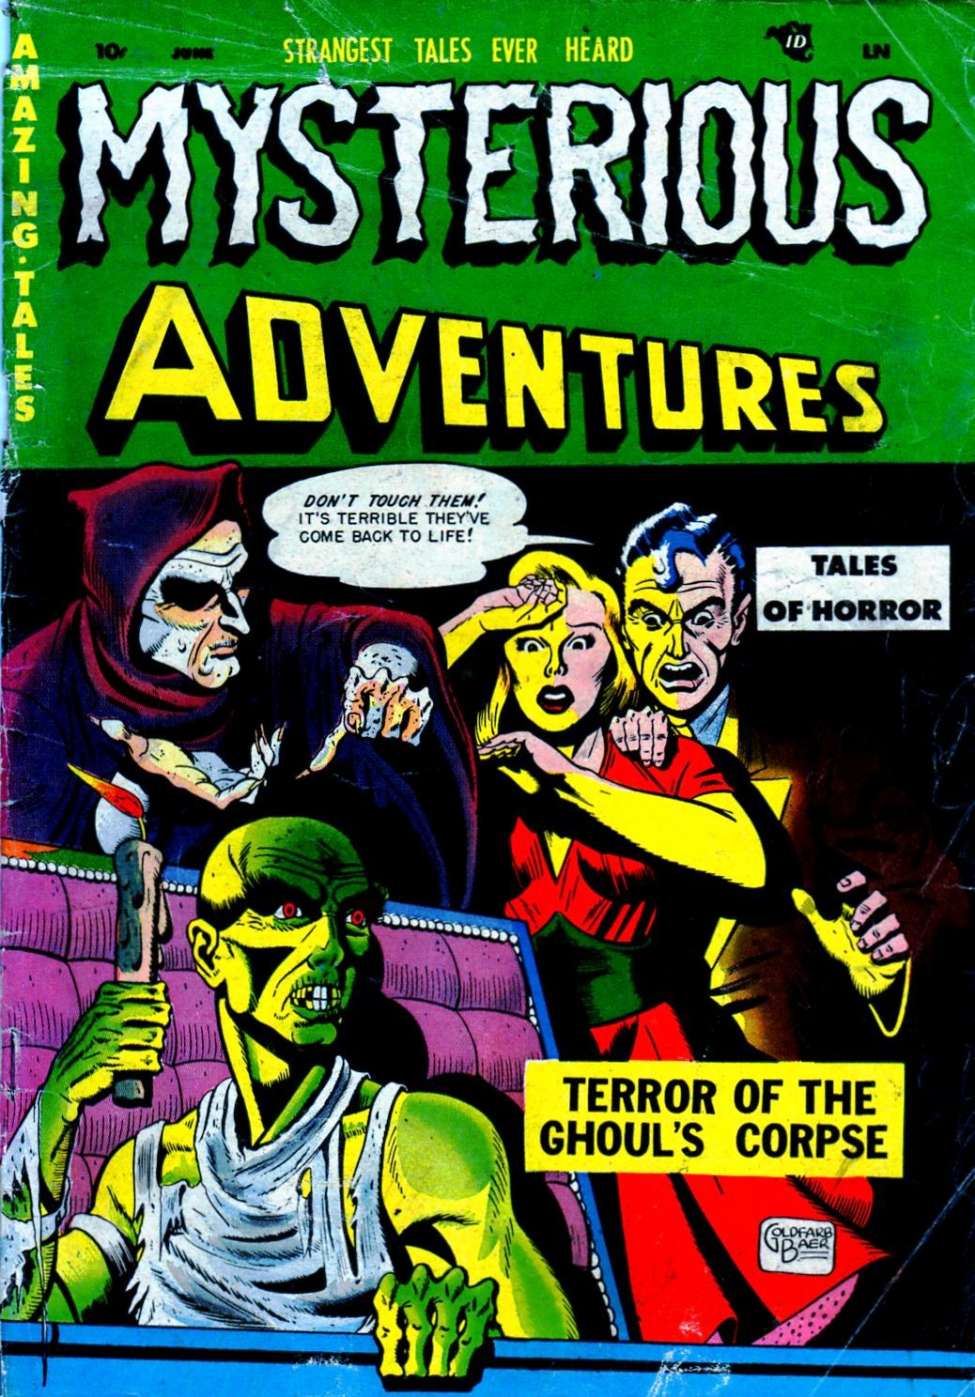 Book Cover For Mysterious Adventures 2 - Version 1